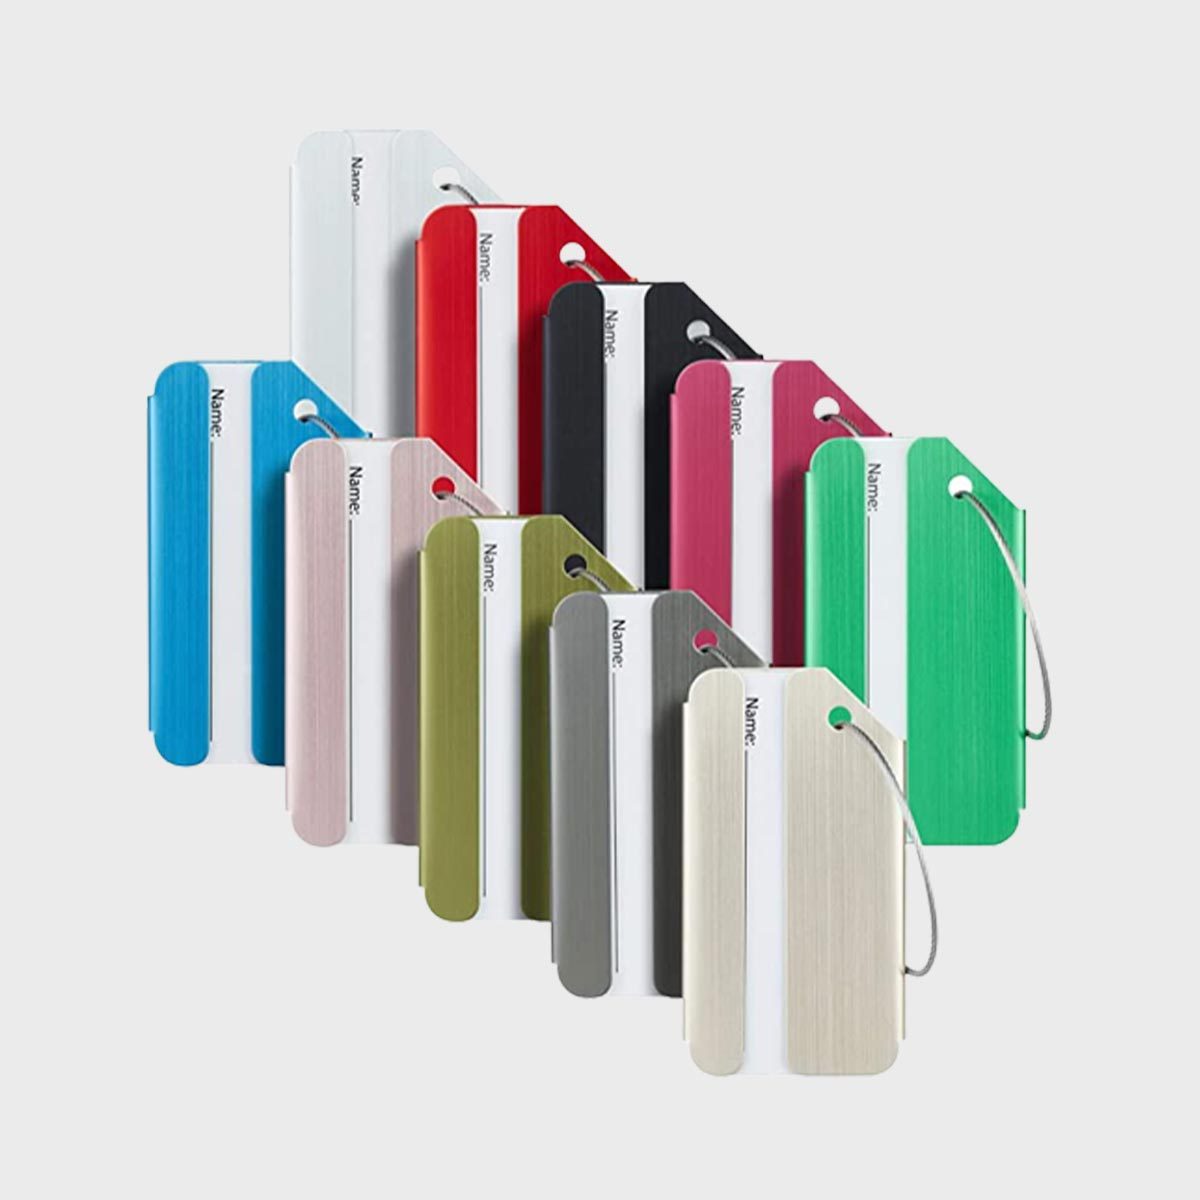 <p>Luggage is put through a lot of wear and tear. <a href="https://www.amazon.com/dp/B074Z4F6WN" rel="noopener">Travelambo</a> makes the best luggage tags to withstand the most rugged of trips. The reinforced aluminum alloy body and stainless steel loop are twice as strong as other traditional tags on the market. Did we mention they're also scratch-resistant <em>and</em> affordable? Choose a set of 10 fun metallic colors to match any <a href="https://www.rd.com/list/best-luggage-sets/">set of bags</a>.</p> <p class="listicle-page__cta-button-shop"><a class="shop-btn" href="https://www.amazon.com/dp/B074Z4F6WN">Shop Now</a></p>